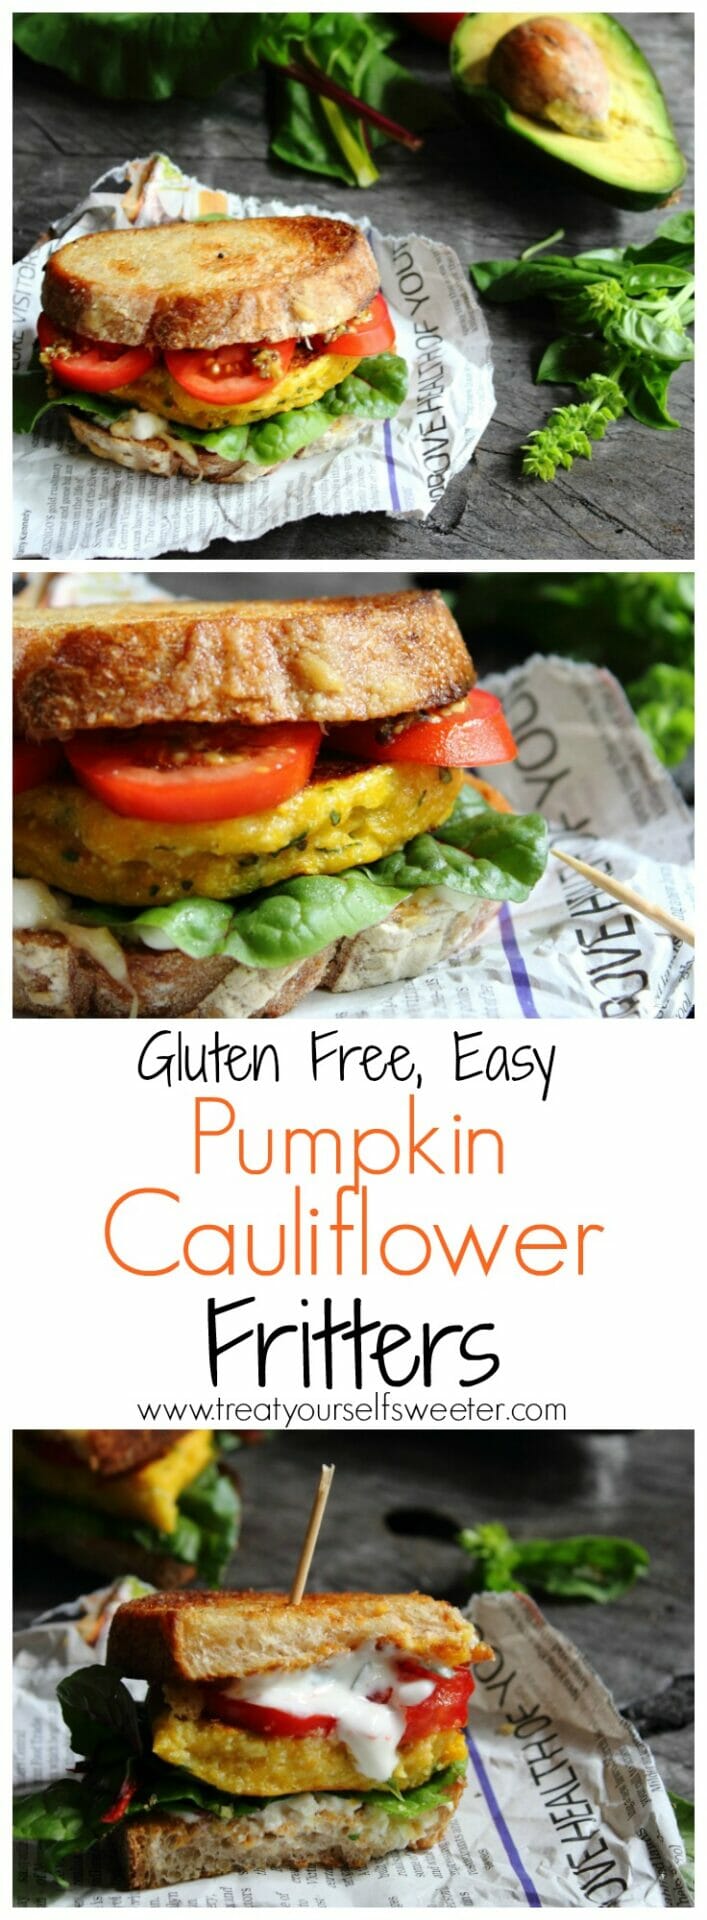 Pumpkin Cauliflower Fritters; cheesy fritters that are crisp on the outside and soft on the inside. Perfect by themselves with veggies or salad and awesome as a veggie burger